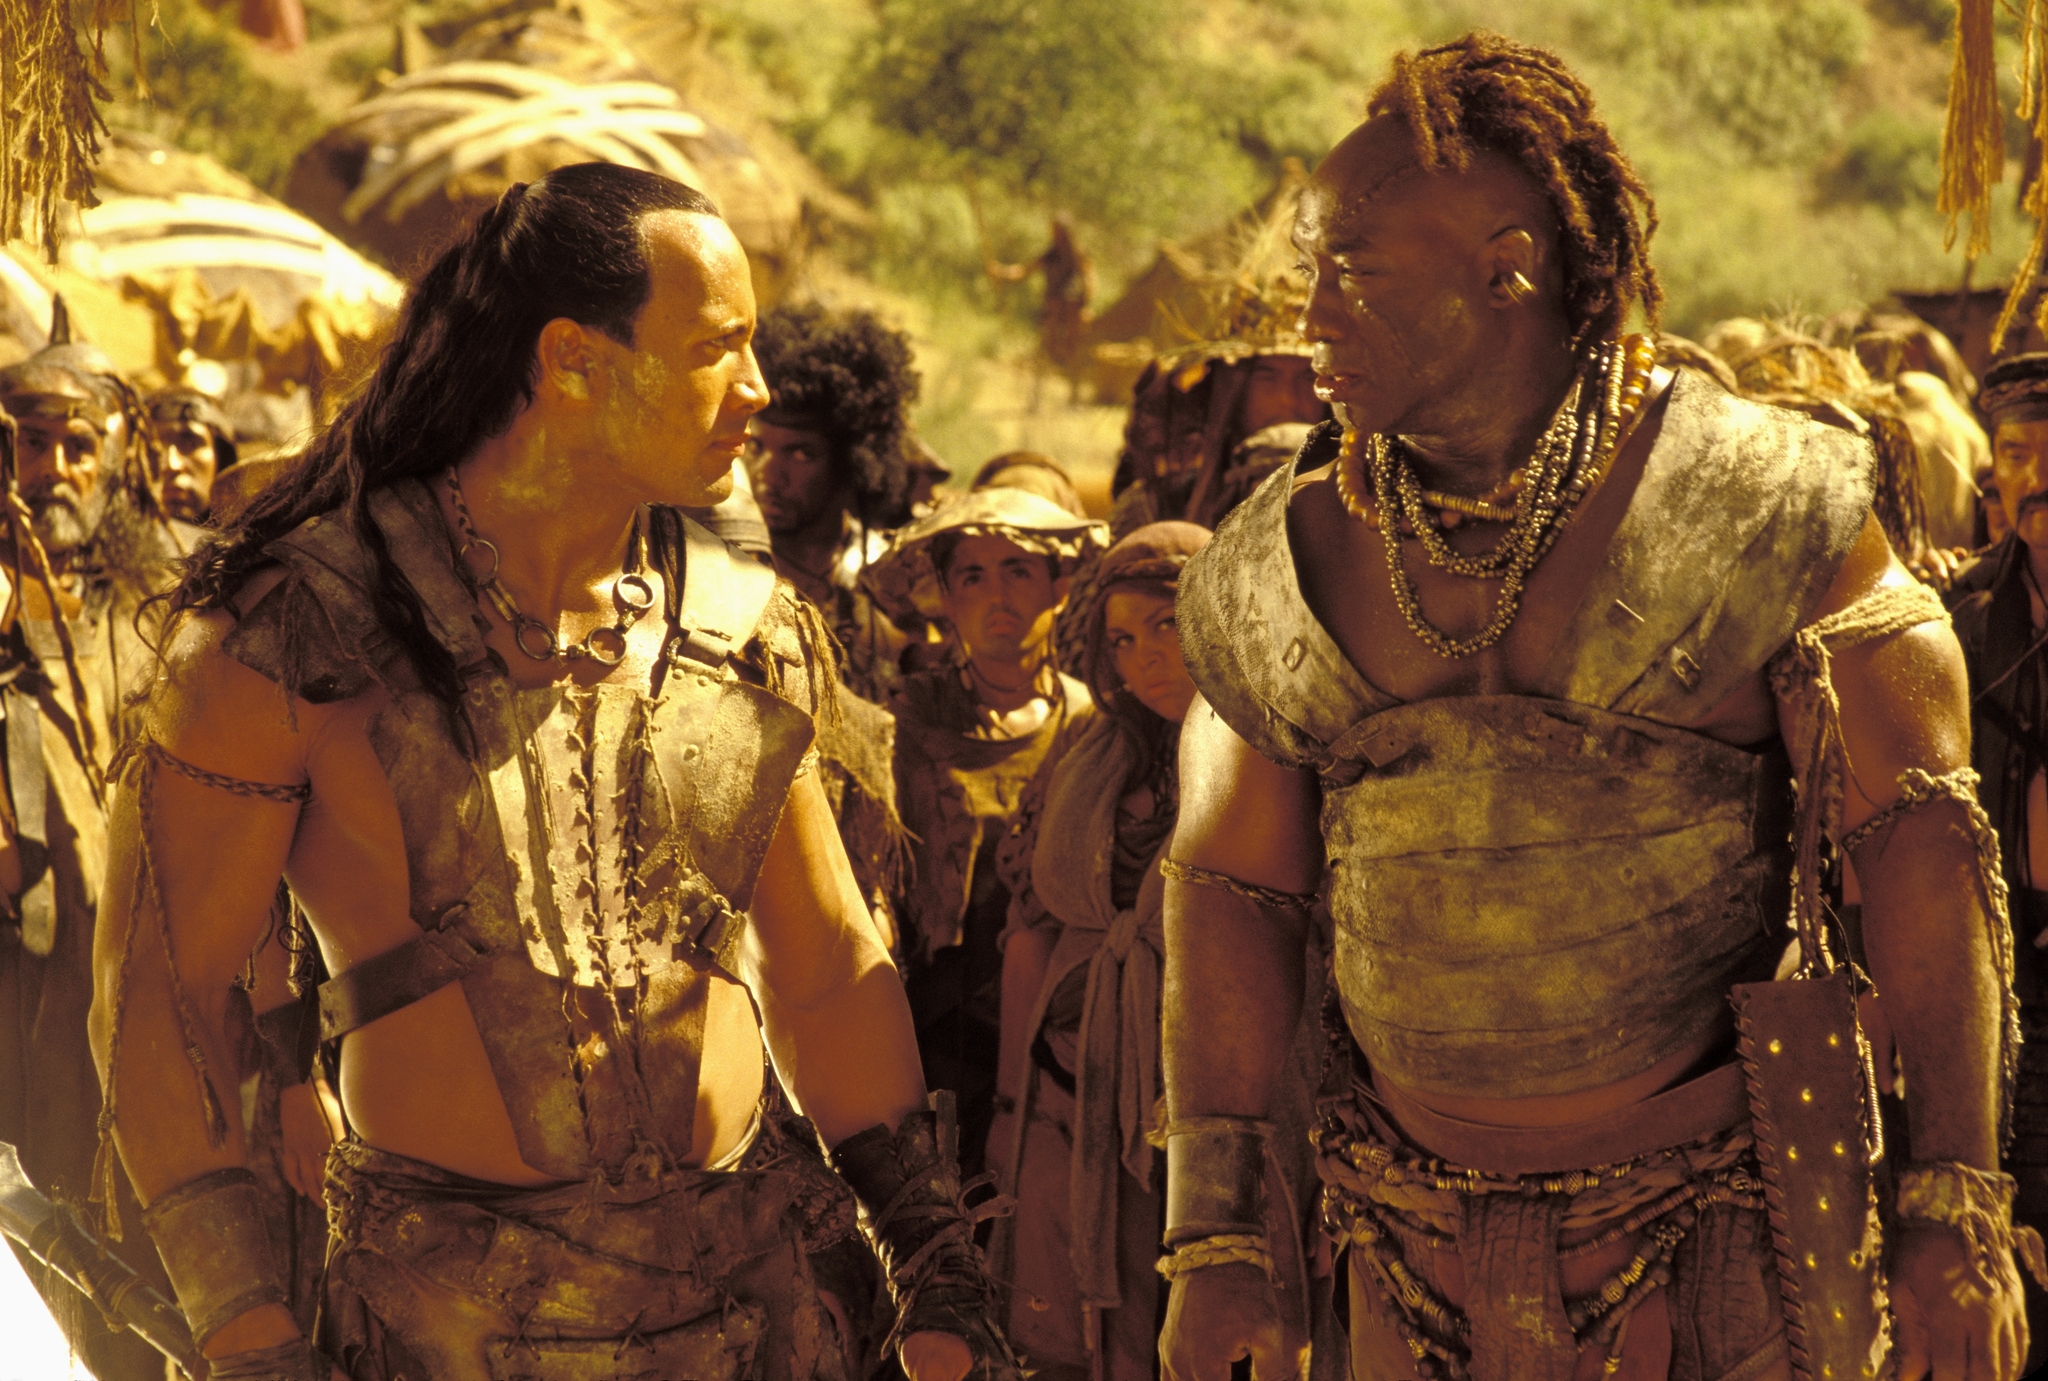 Michael Clarke Duncan and Dwayne Johnson in The Scorpion King (2002)